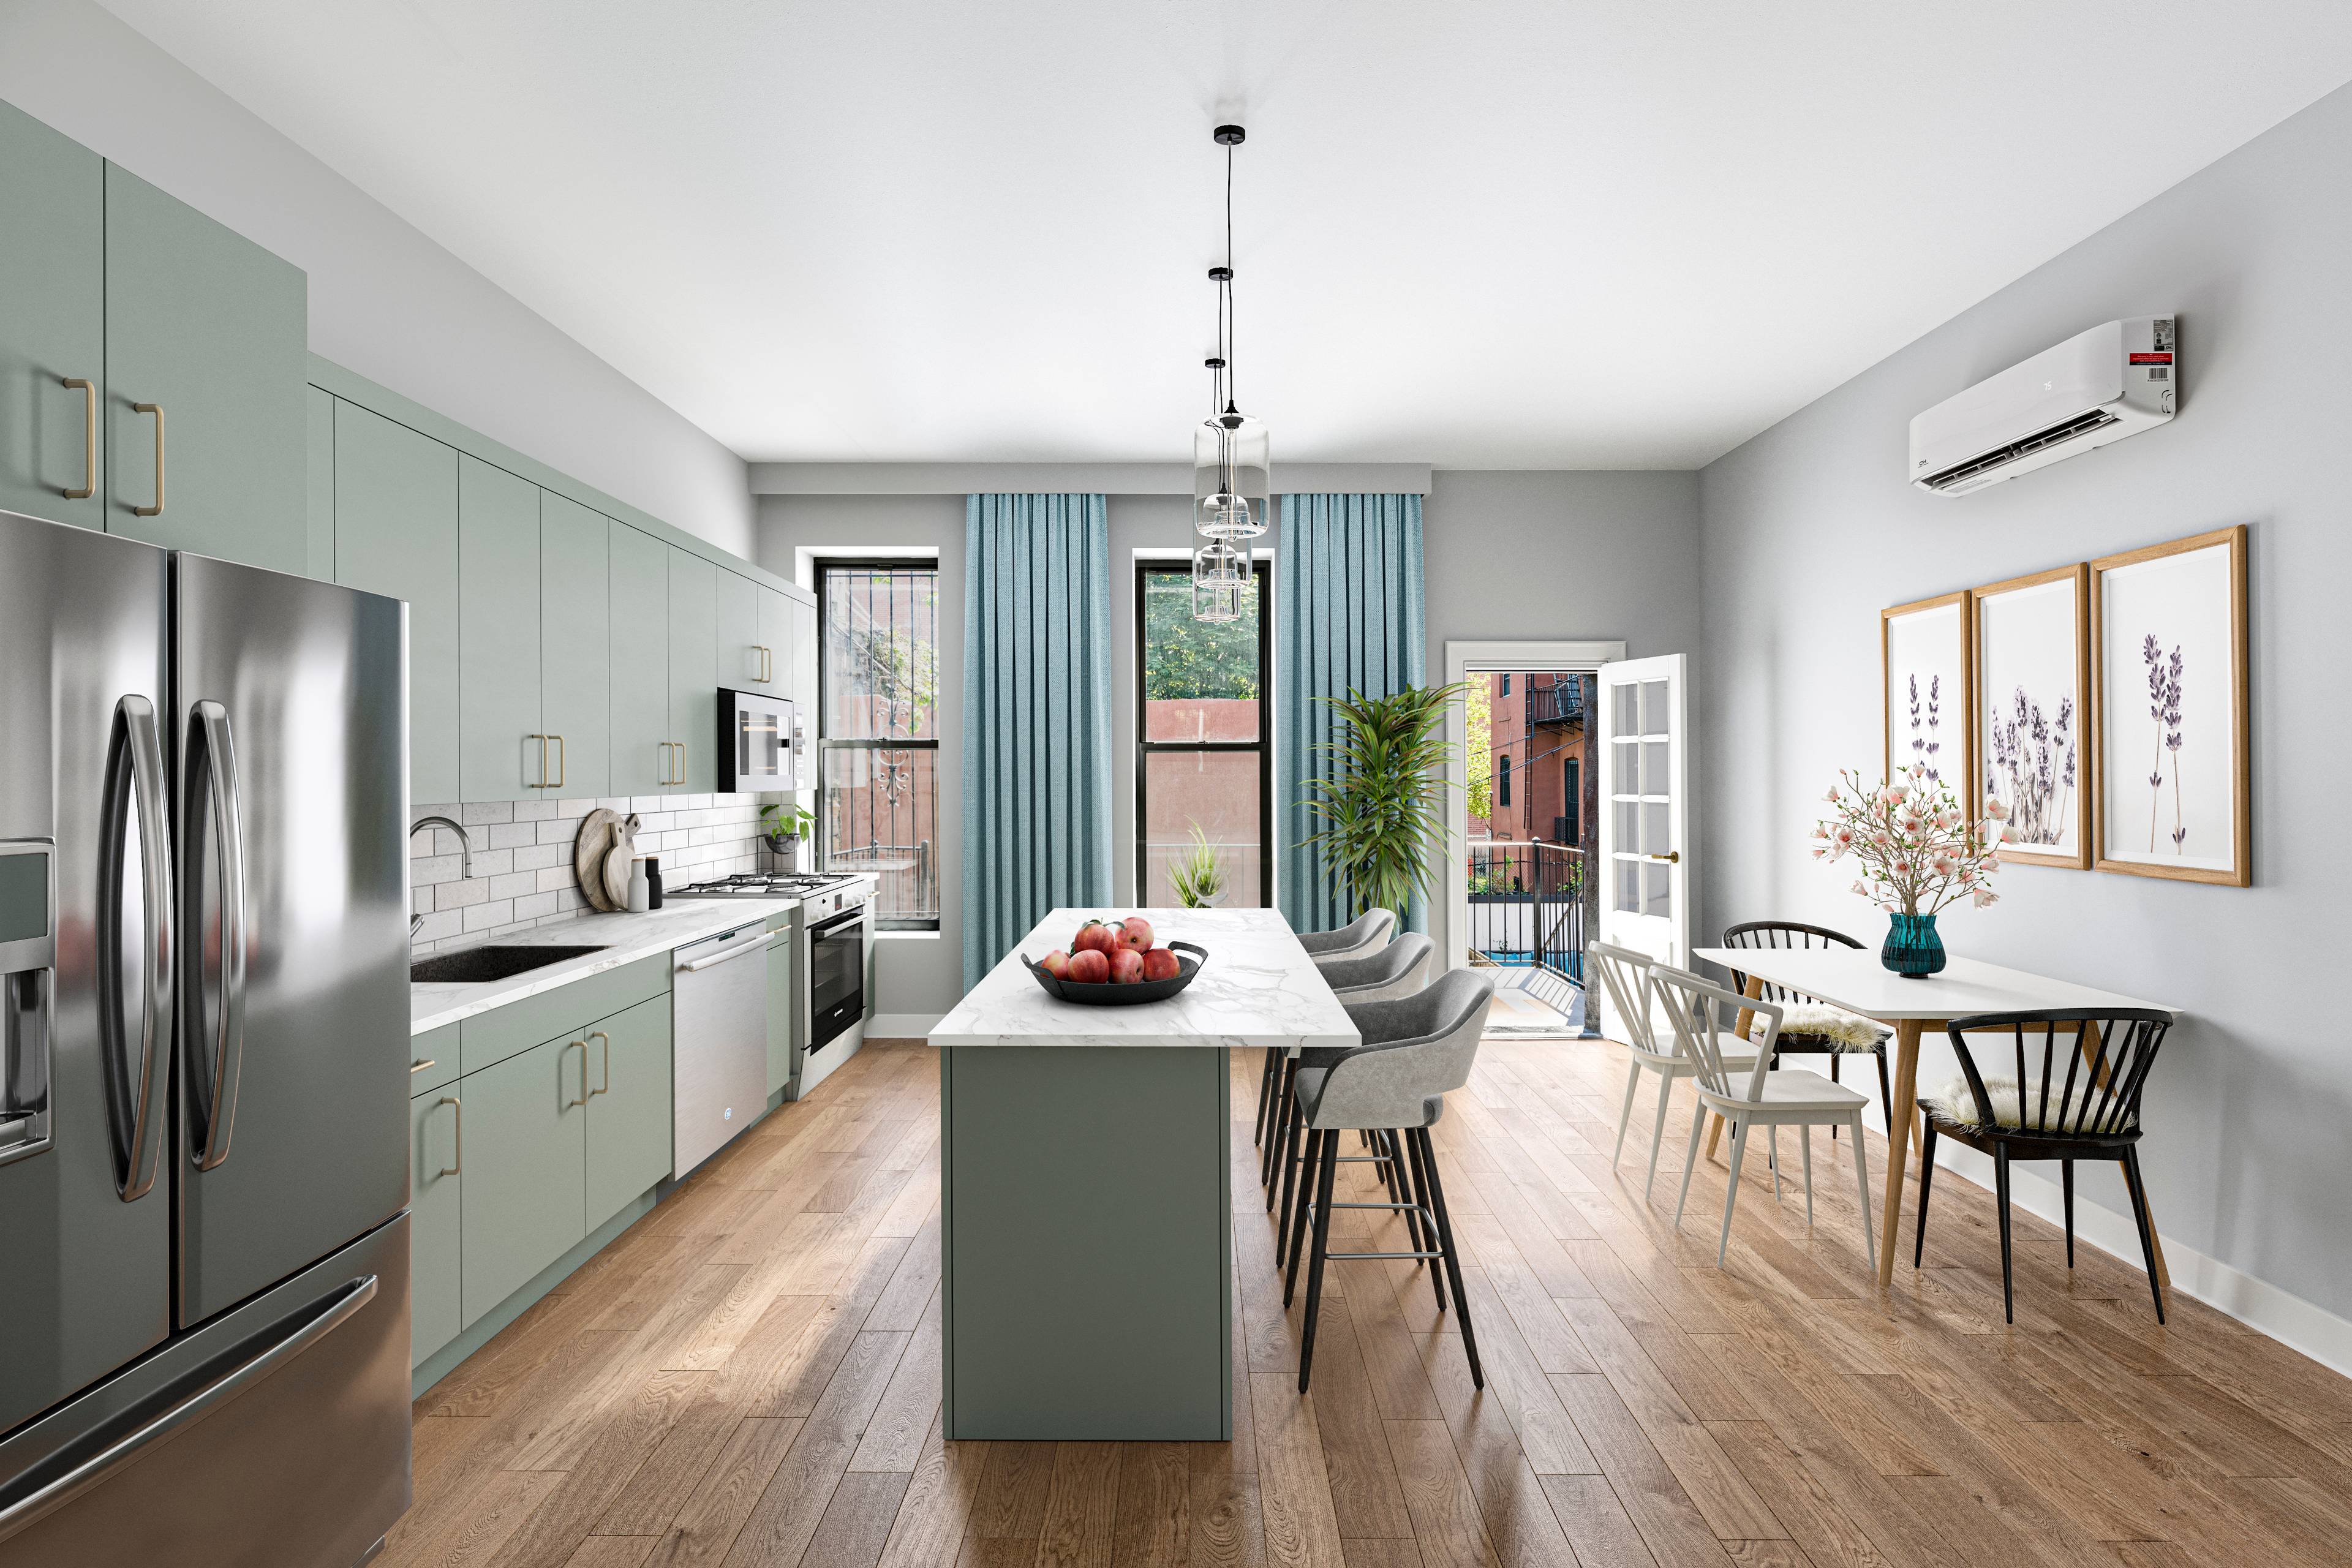 This beautifully renovated two family building offers gorgeous interiors and fantastic outdoor space near the border of Bedford Stuyvesant and Clinton Hill.